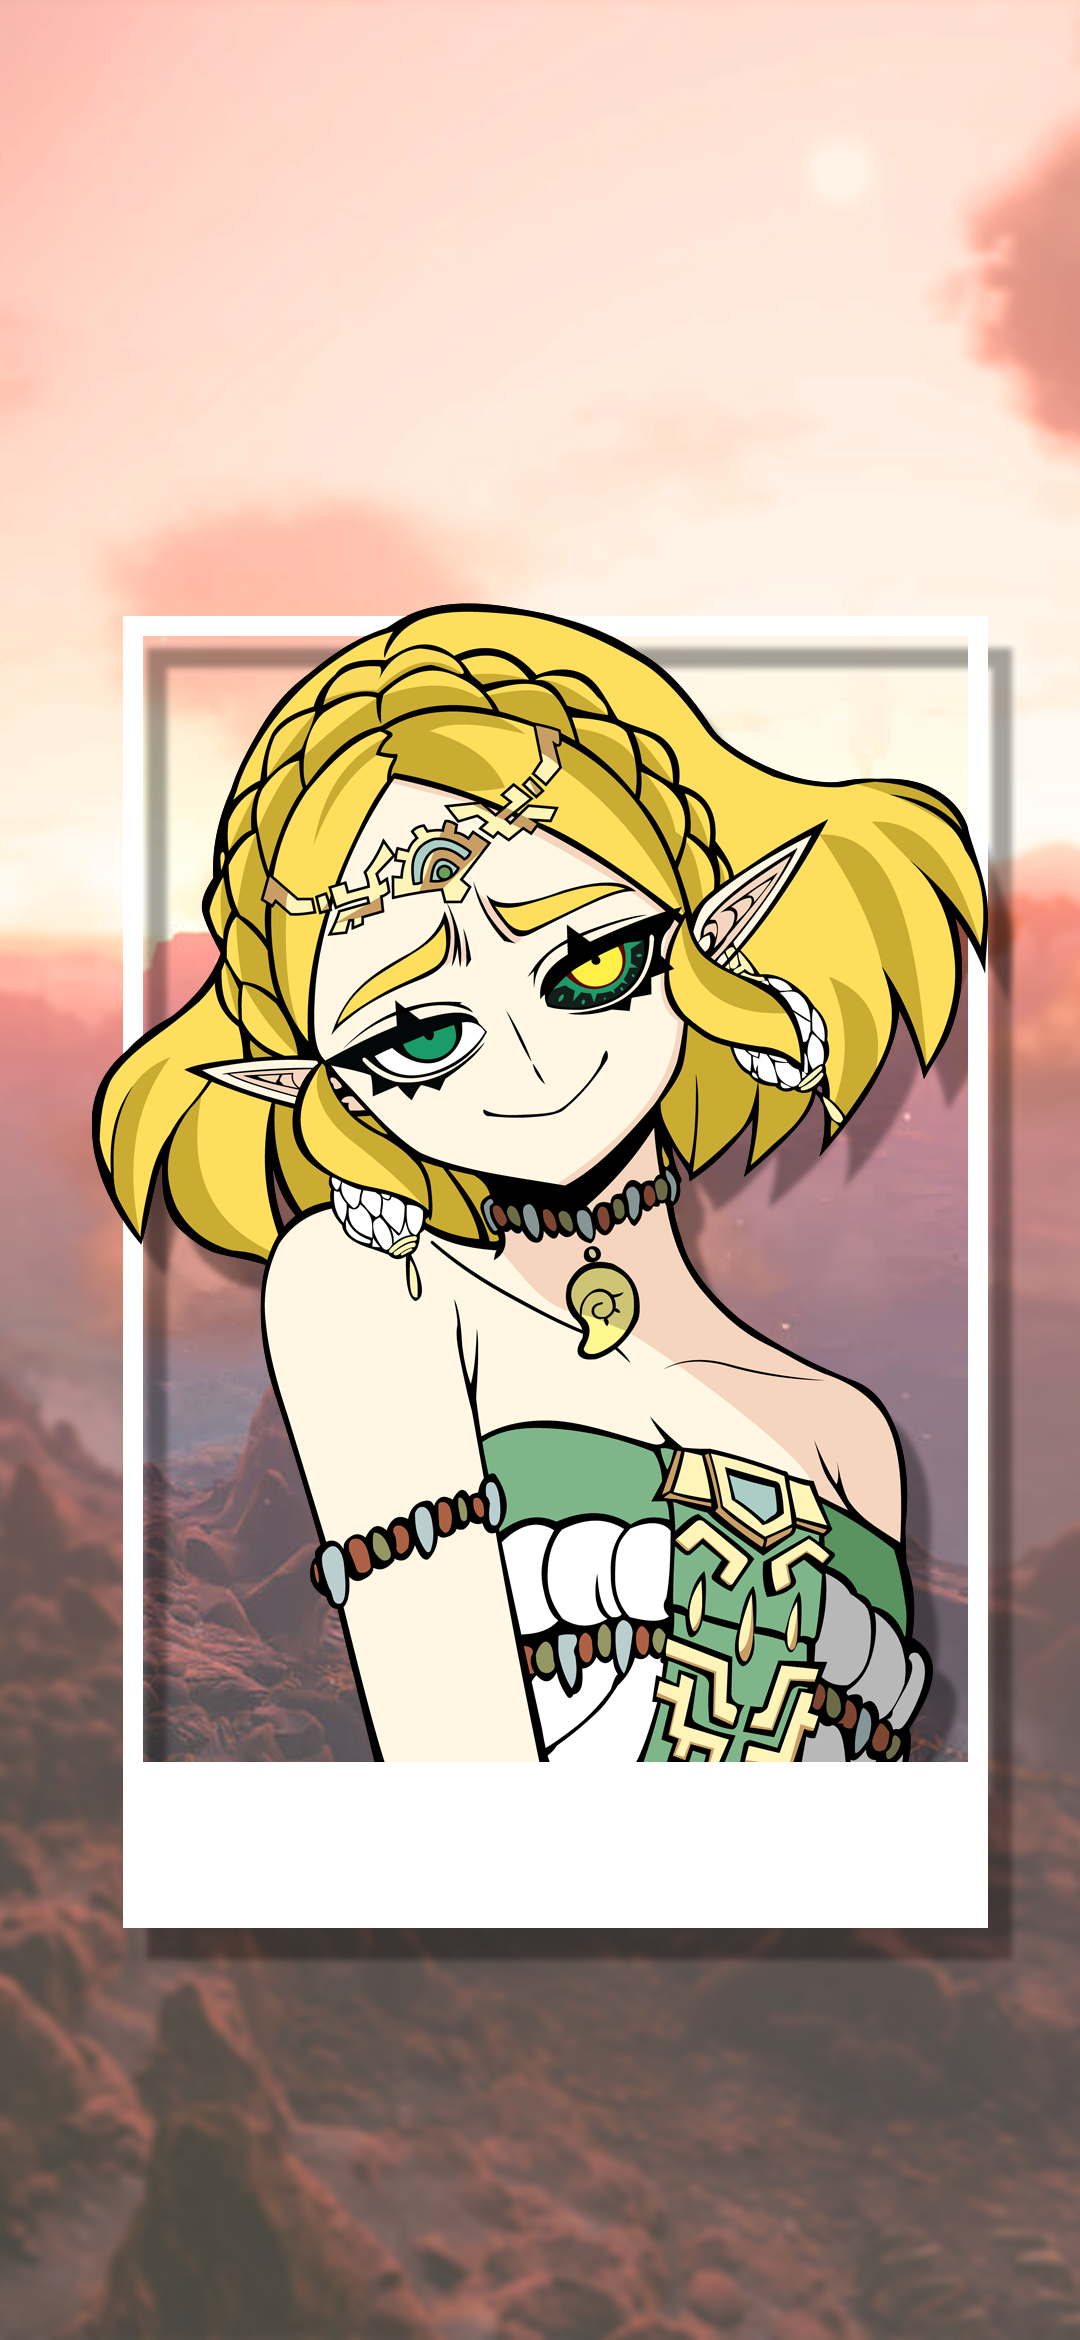 Anime 1080x2340 Zelda The Legend of Zelda: Tears of the Kingdom picture-in-picture mountains jewelry pointy ears earring blonde looking at viewer smiling black sclera video game girls video game characters necklace vector Vector trace dress green eyes yellow eyes bare shoulders large earrings Nintendo